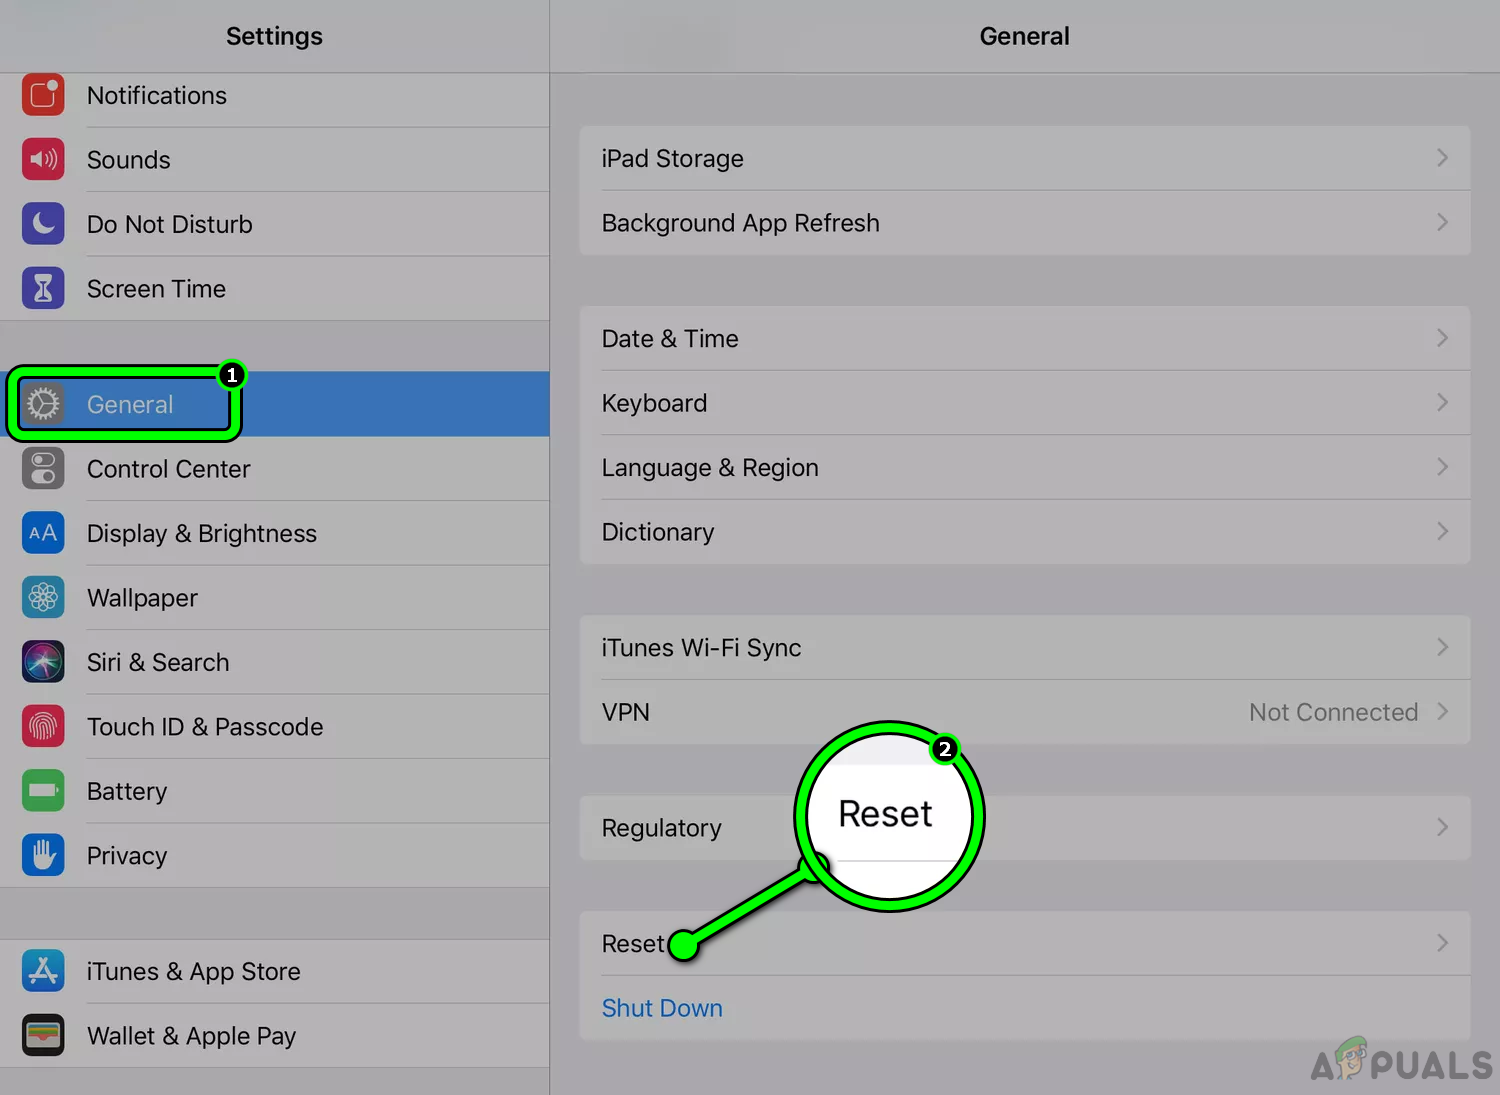 Open Reset in the General iPad Settings